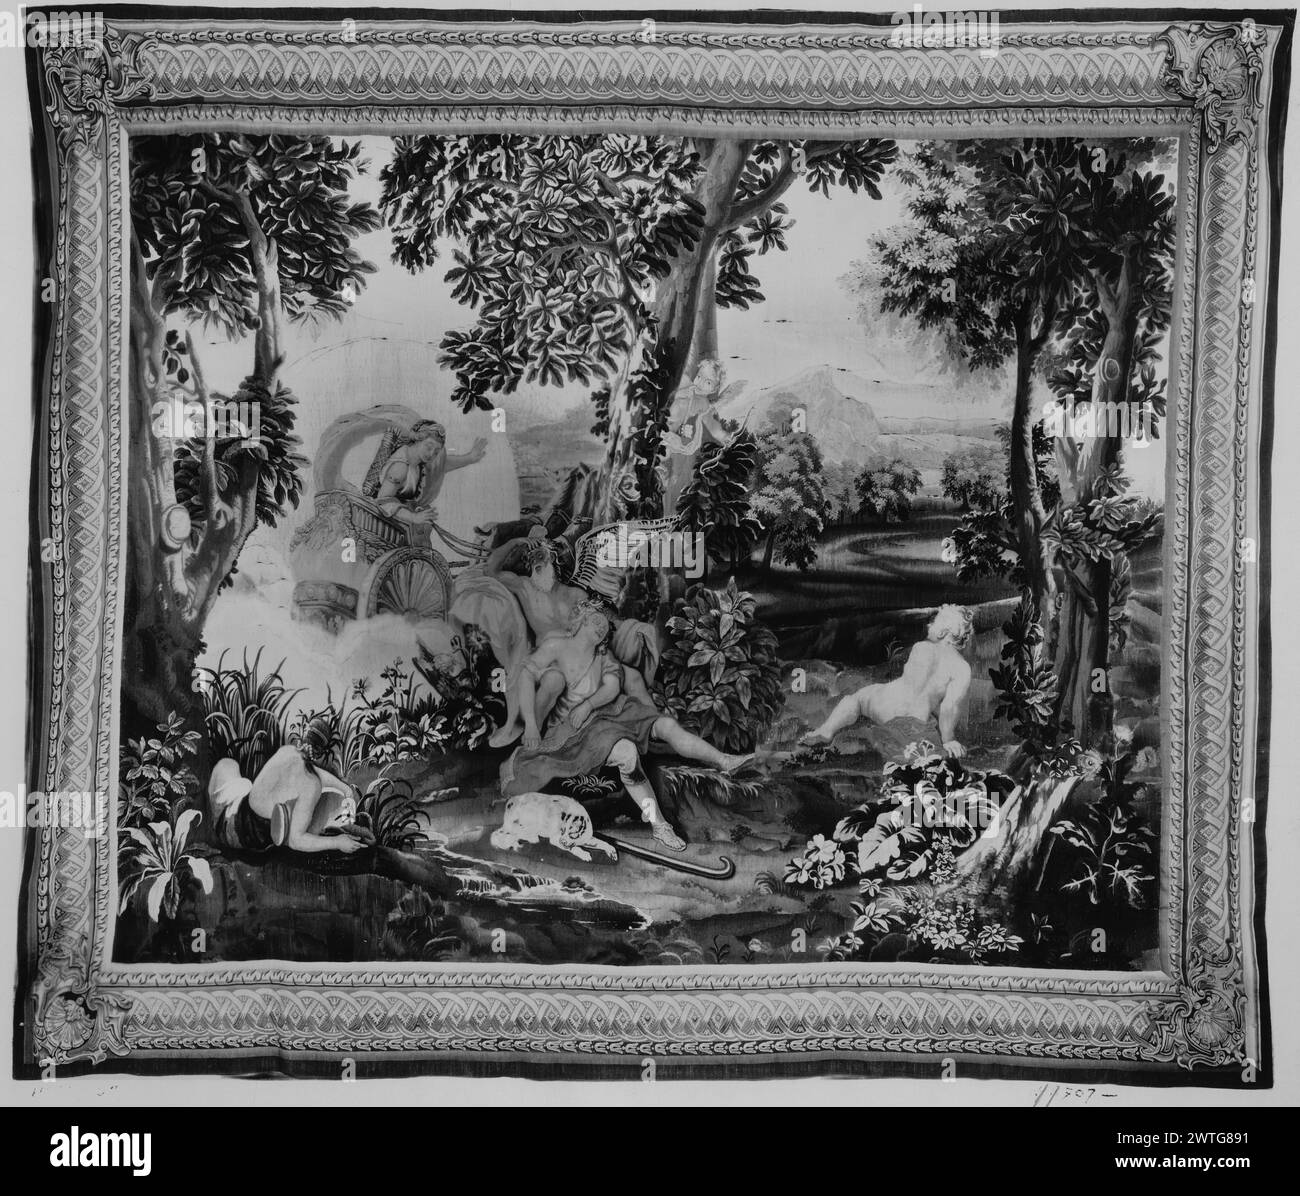 Diana (Artemis) and Endymion. Houasse, René-Antoine (French, 1645-1710) (designed after, attr.) [painter] c. 1700-1720 Tapestry Dimensions: H 10'1' x W 10'9' Tapestry Materials/Techniques: unknown Culture: French Weaving Center: Paris Ownership History: French & Co.?. C. John coll., London. United States, New York, New York, Sotheby's, November 29, 1980, lot 451. Diana, in the guise of Luna (Selene), rides in chariot near Endymion, who sleeps in the arms of Hypnos (Somnus); in landscape setting (BRD) picture-frame border with interlaced rosetted strapwork, shell cartouche in corners No French Stock Photo